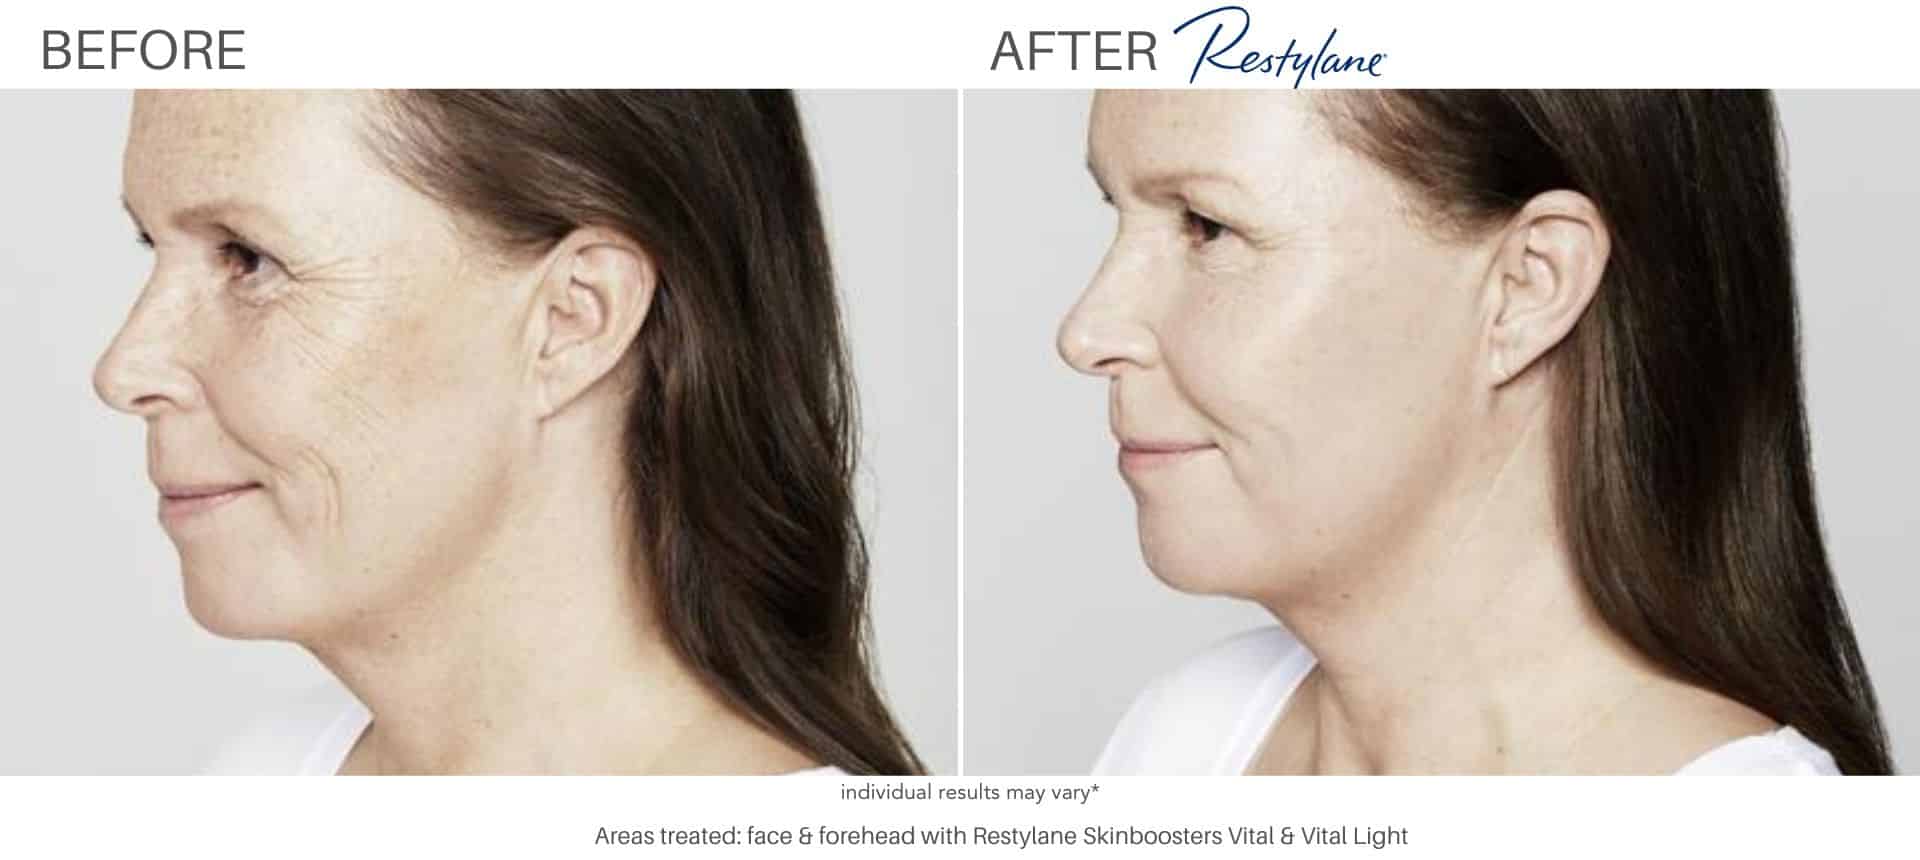 Restylane before and after results in Los Angeles, CA at Sculpt DTLA.